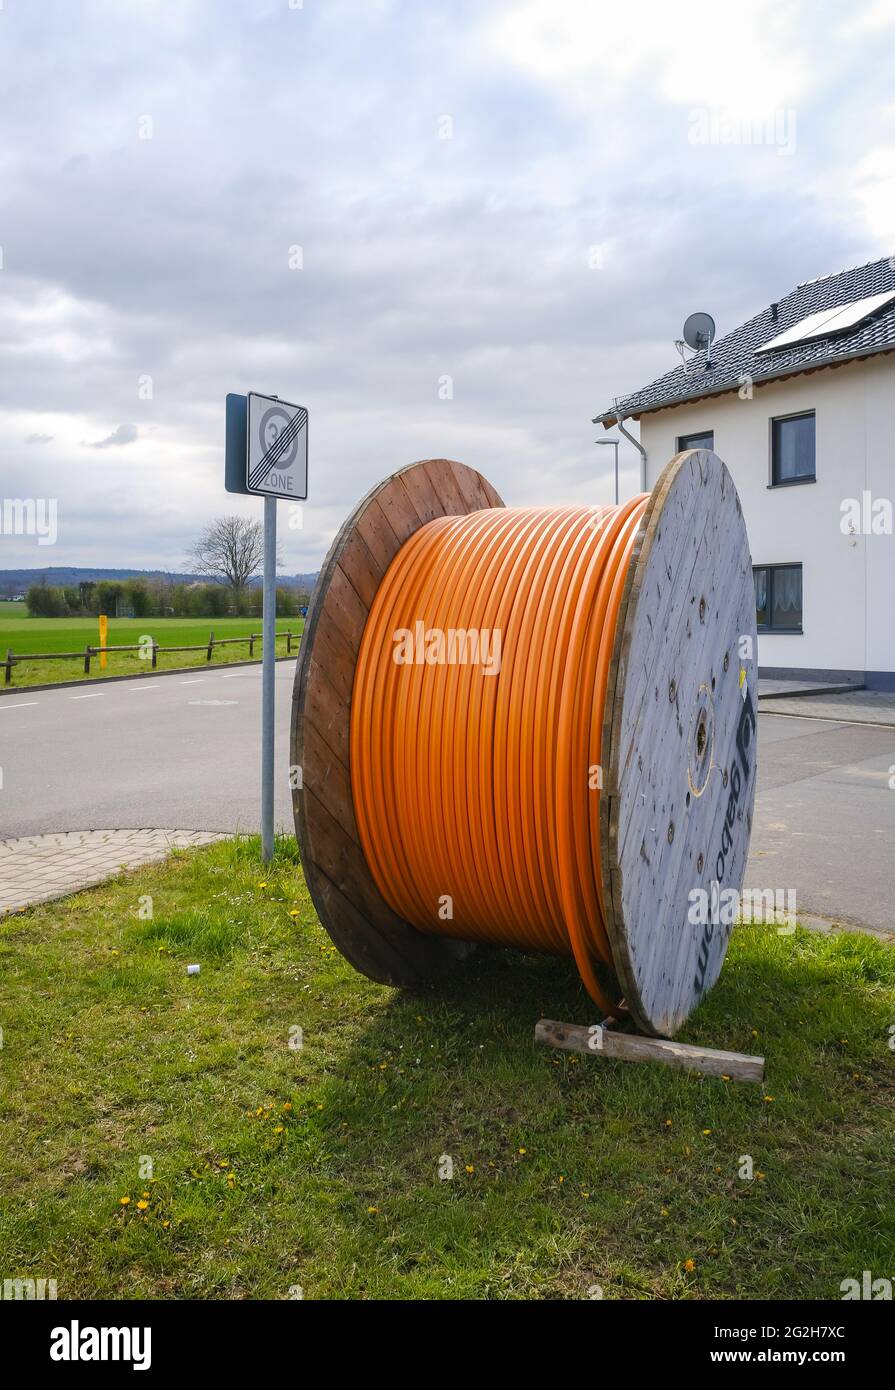 Rheinbach, North Rhine-Westphalia, Germany - Internet broadband expansion, construction site burial of fiber optic cable, cable drum with fiber optic cable, new construction of fiber optic routes on behalf of Telekom, fast Internet, DSL cable connection for households. Stock Photo